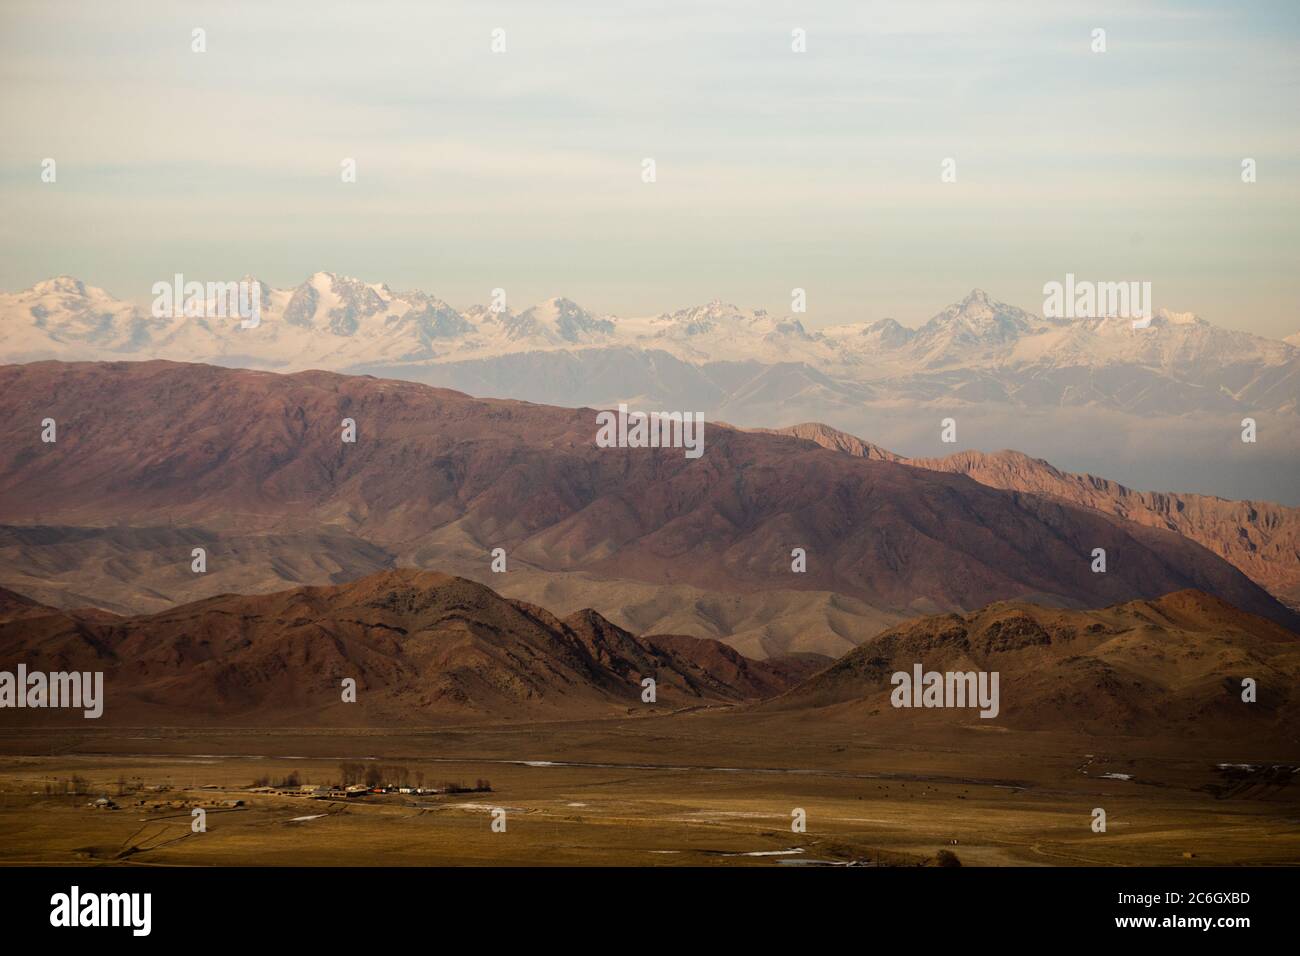 Scenes from Jiachy Yurt Camp on the South Shore of Issyk Kol in Kyrgyzstan. Stock Photo